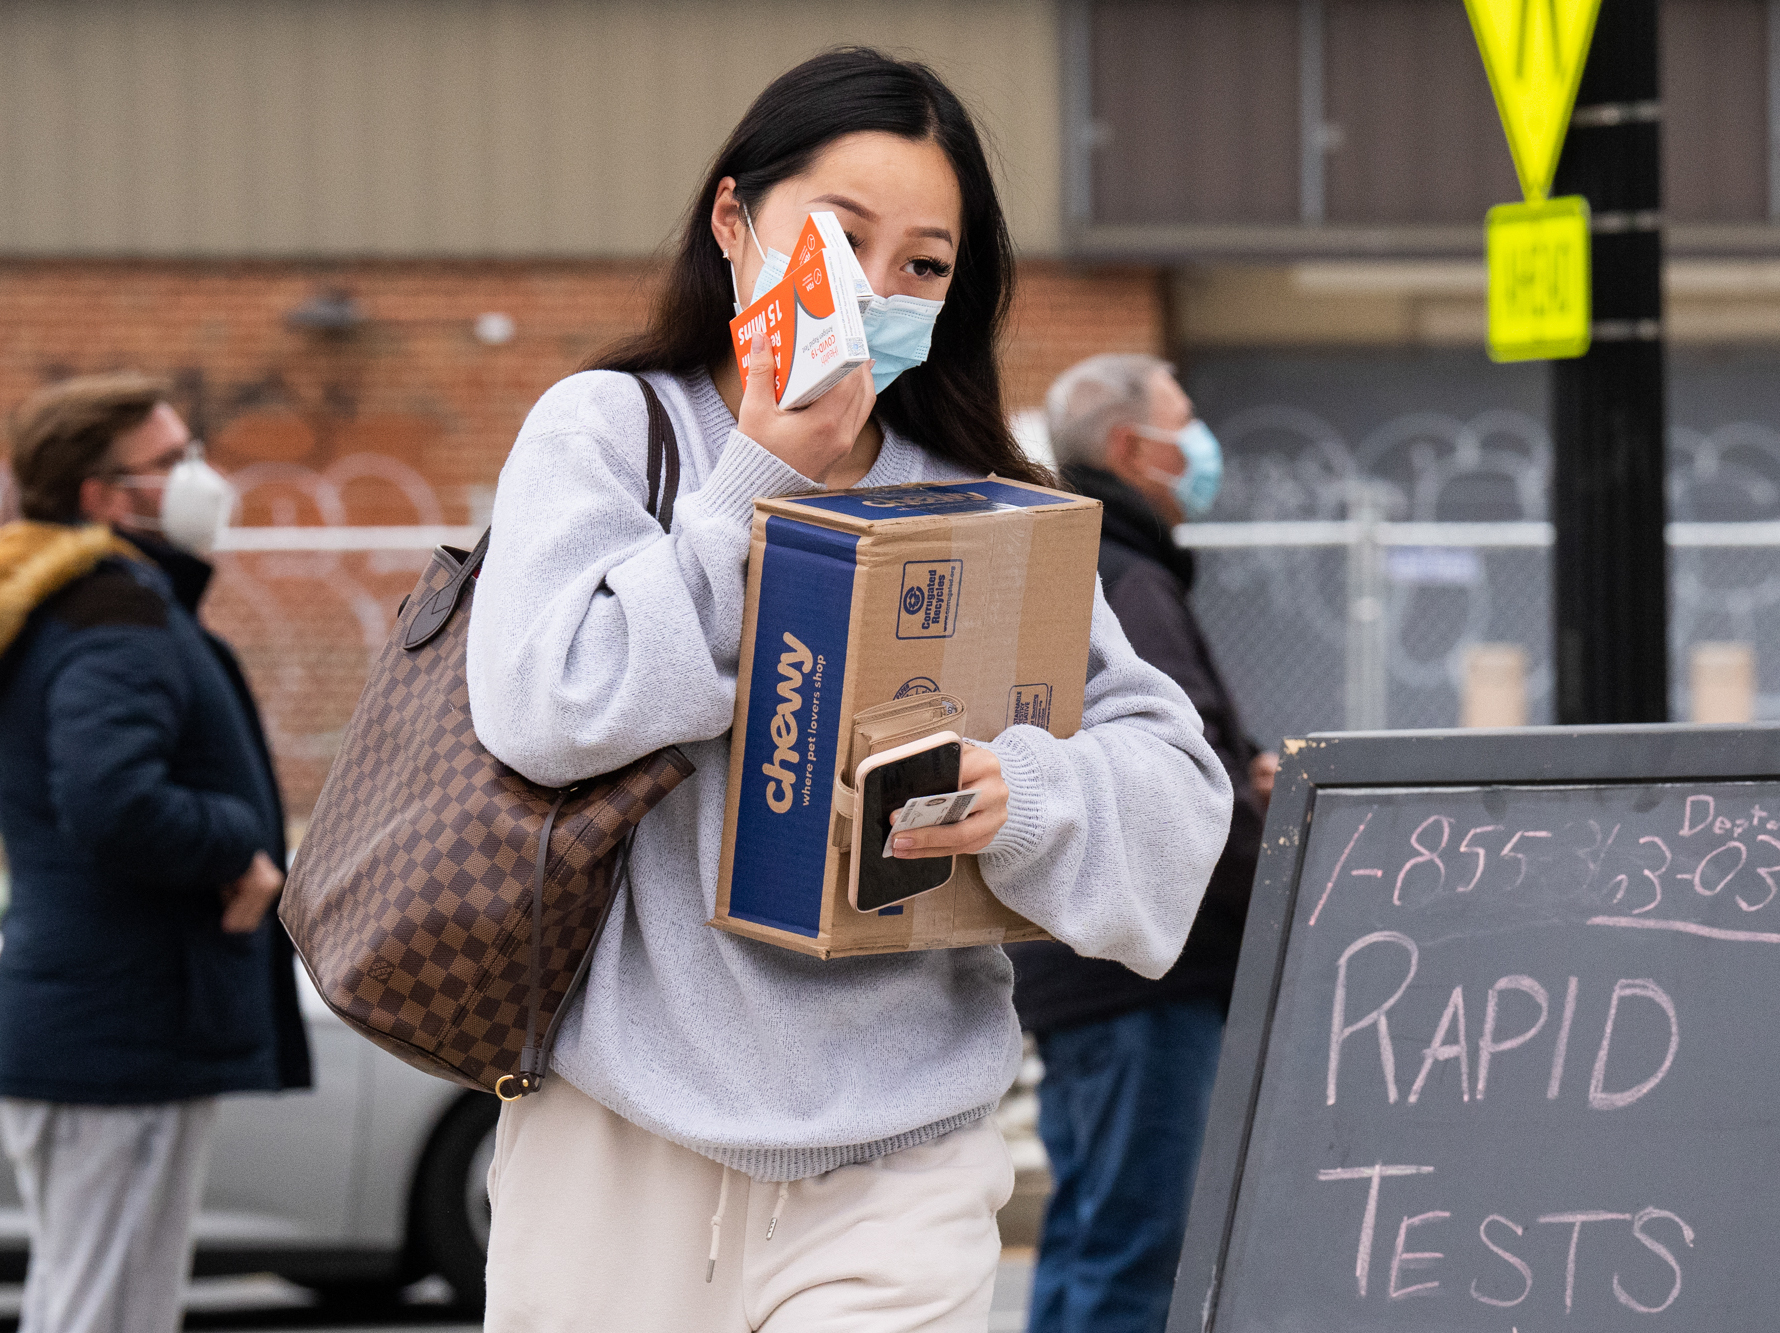 Woman walking with box and wearing a mask